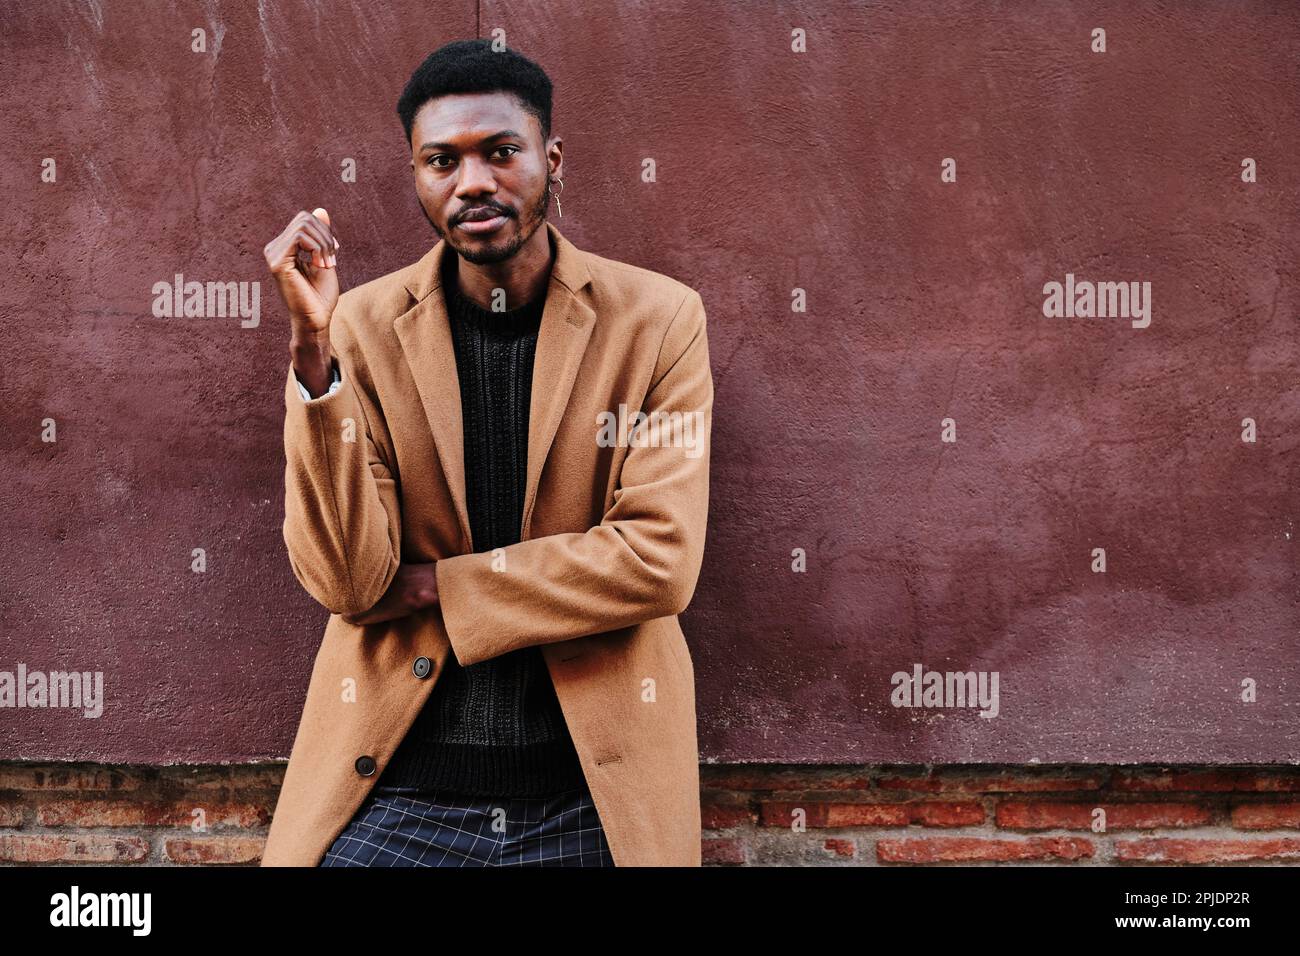 Stylish black man looking at camera with a serious face while posing outdoors. Stock Photo